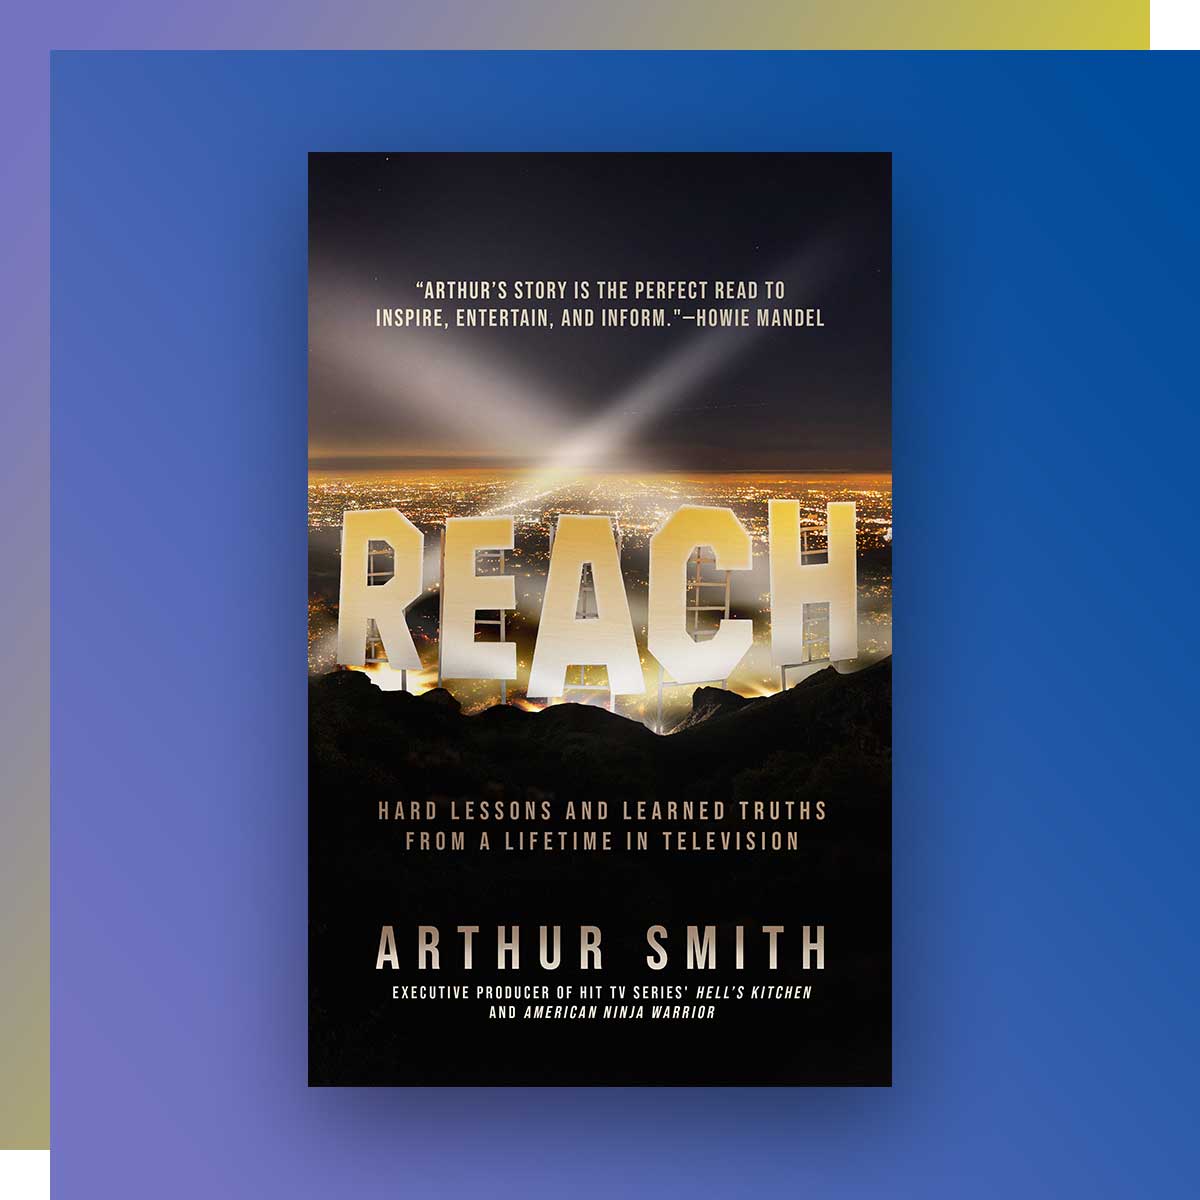 Reach: Hard Lessons and Learned Truths from a Lifetime in Television by Arthur Smith